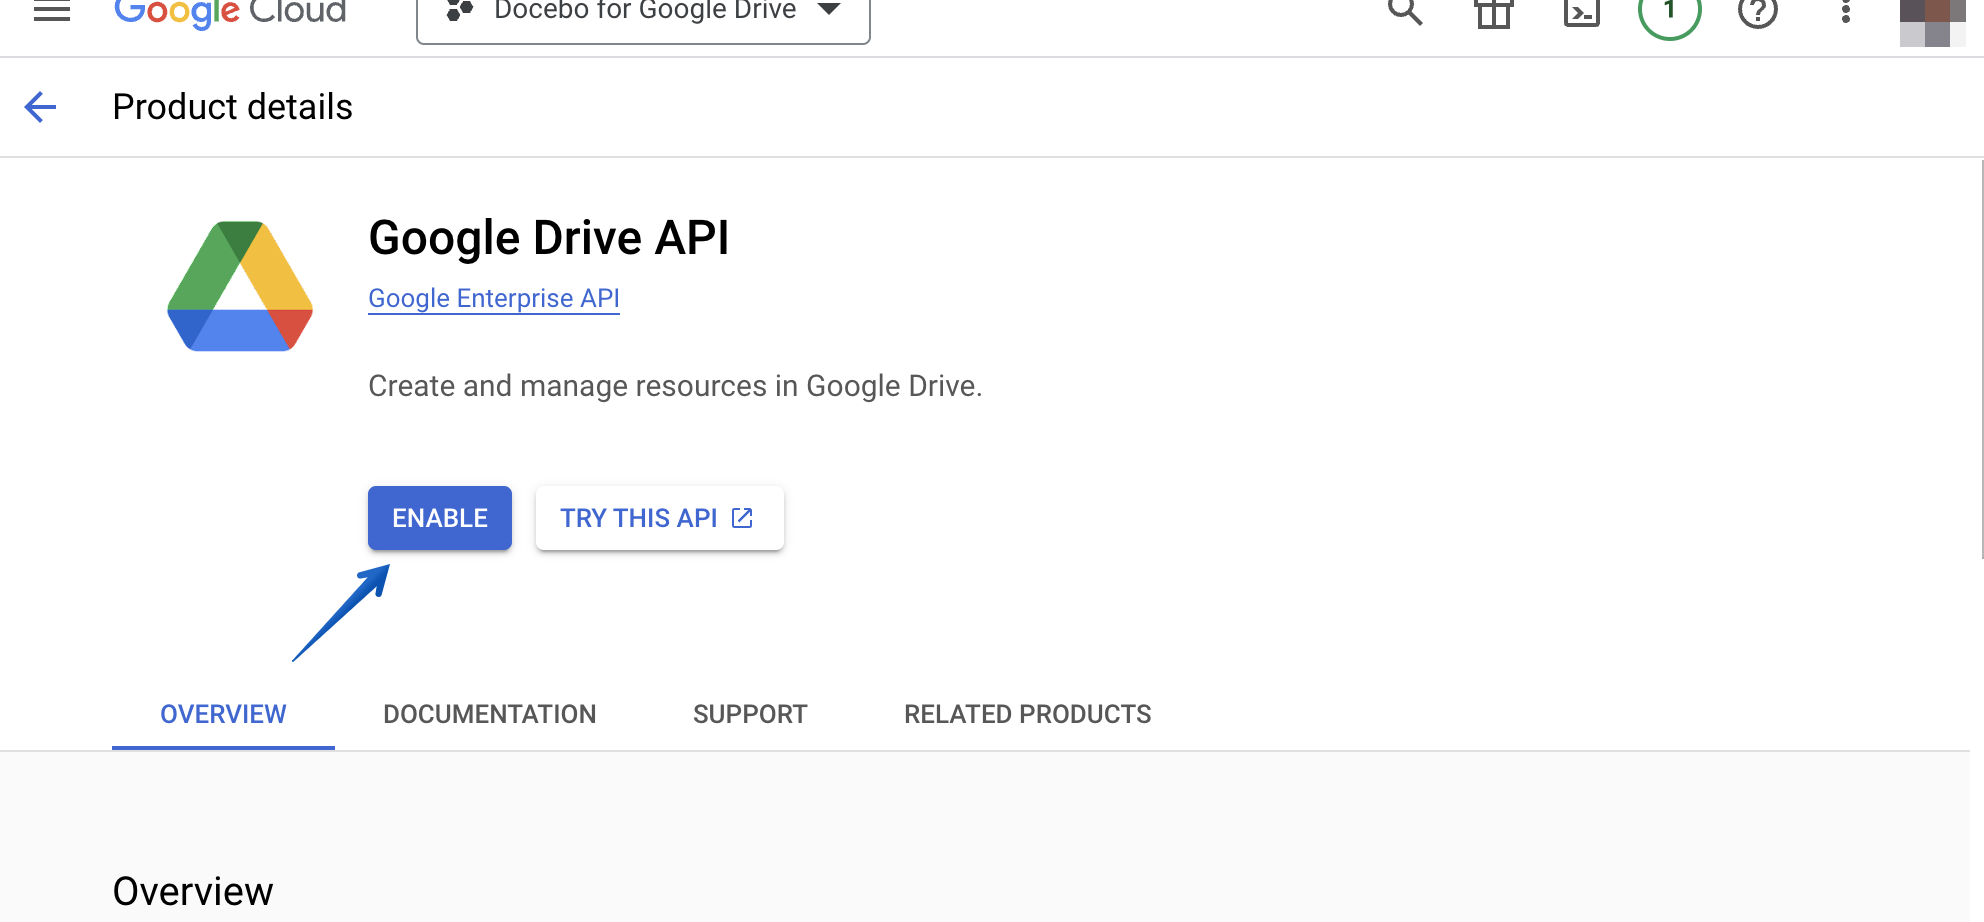 Enabling the Google Drive API by pressing the Enable button